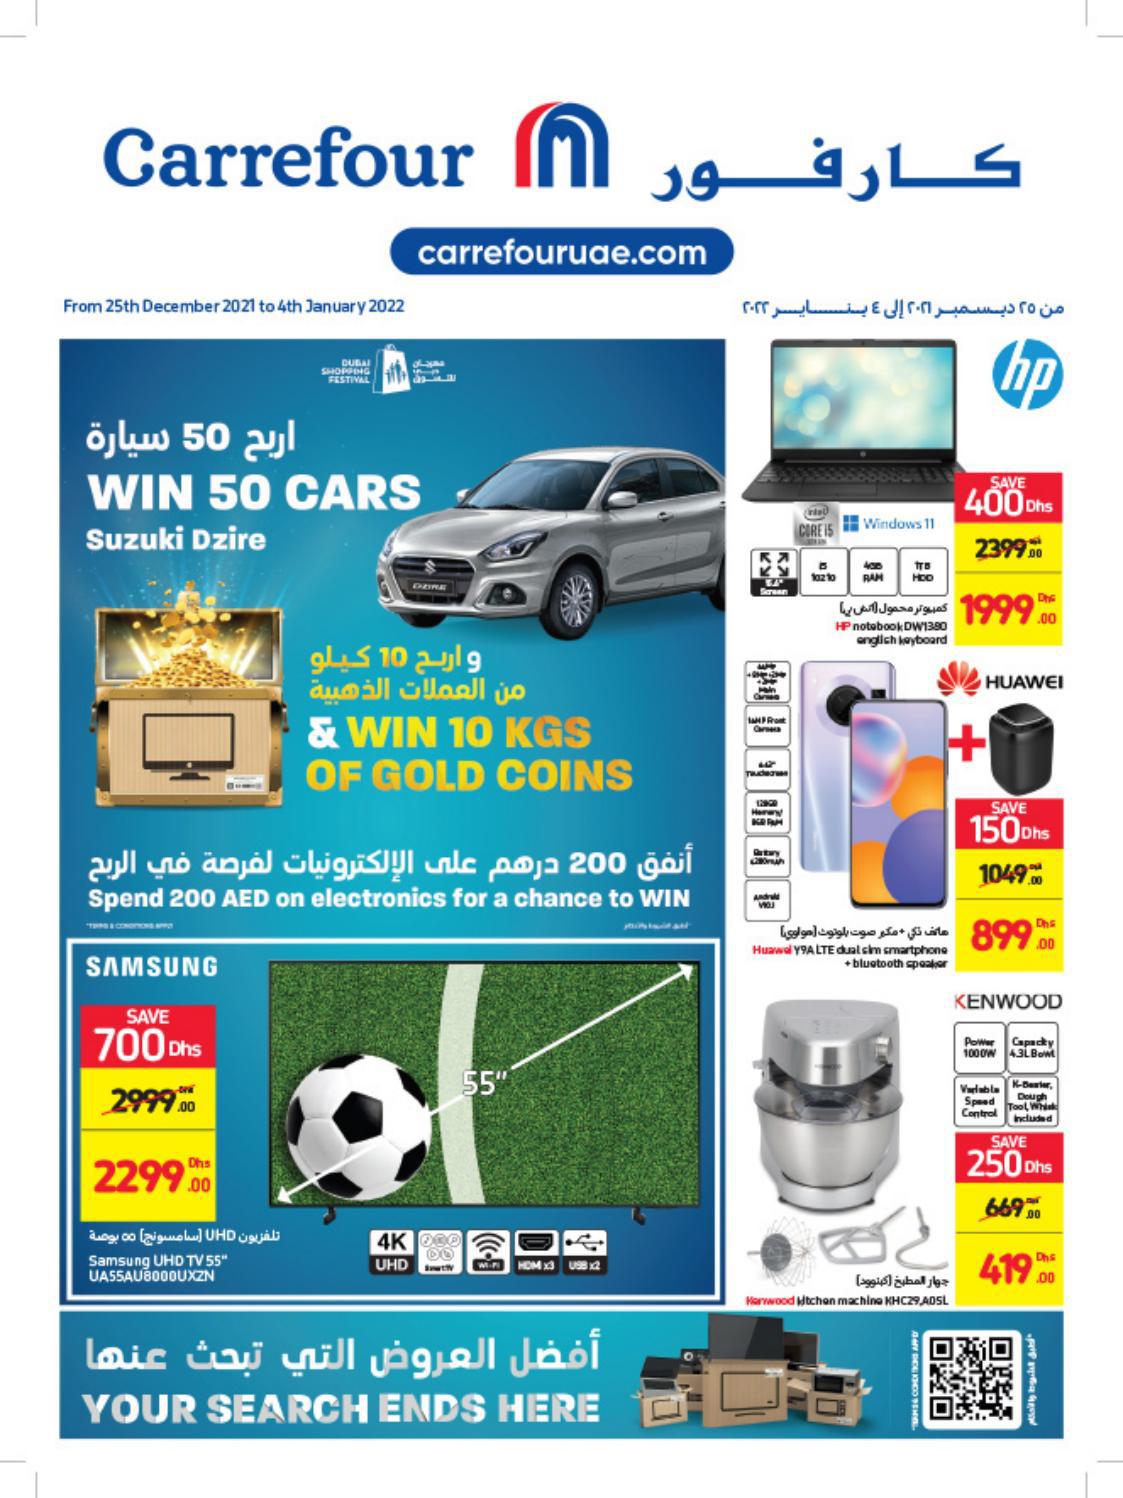 Carrefour-Latest_offers-1